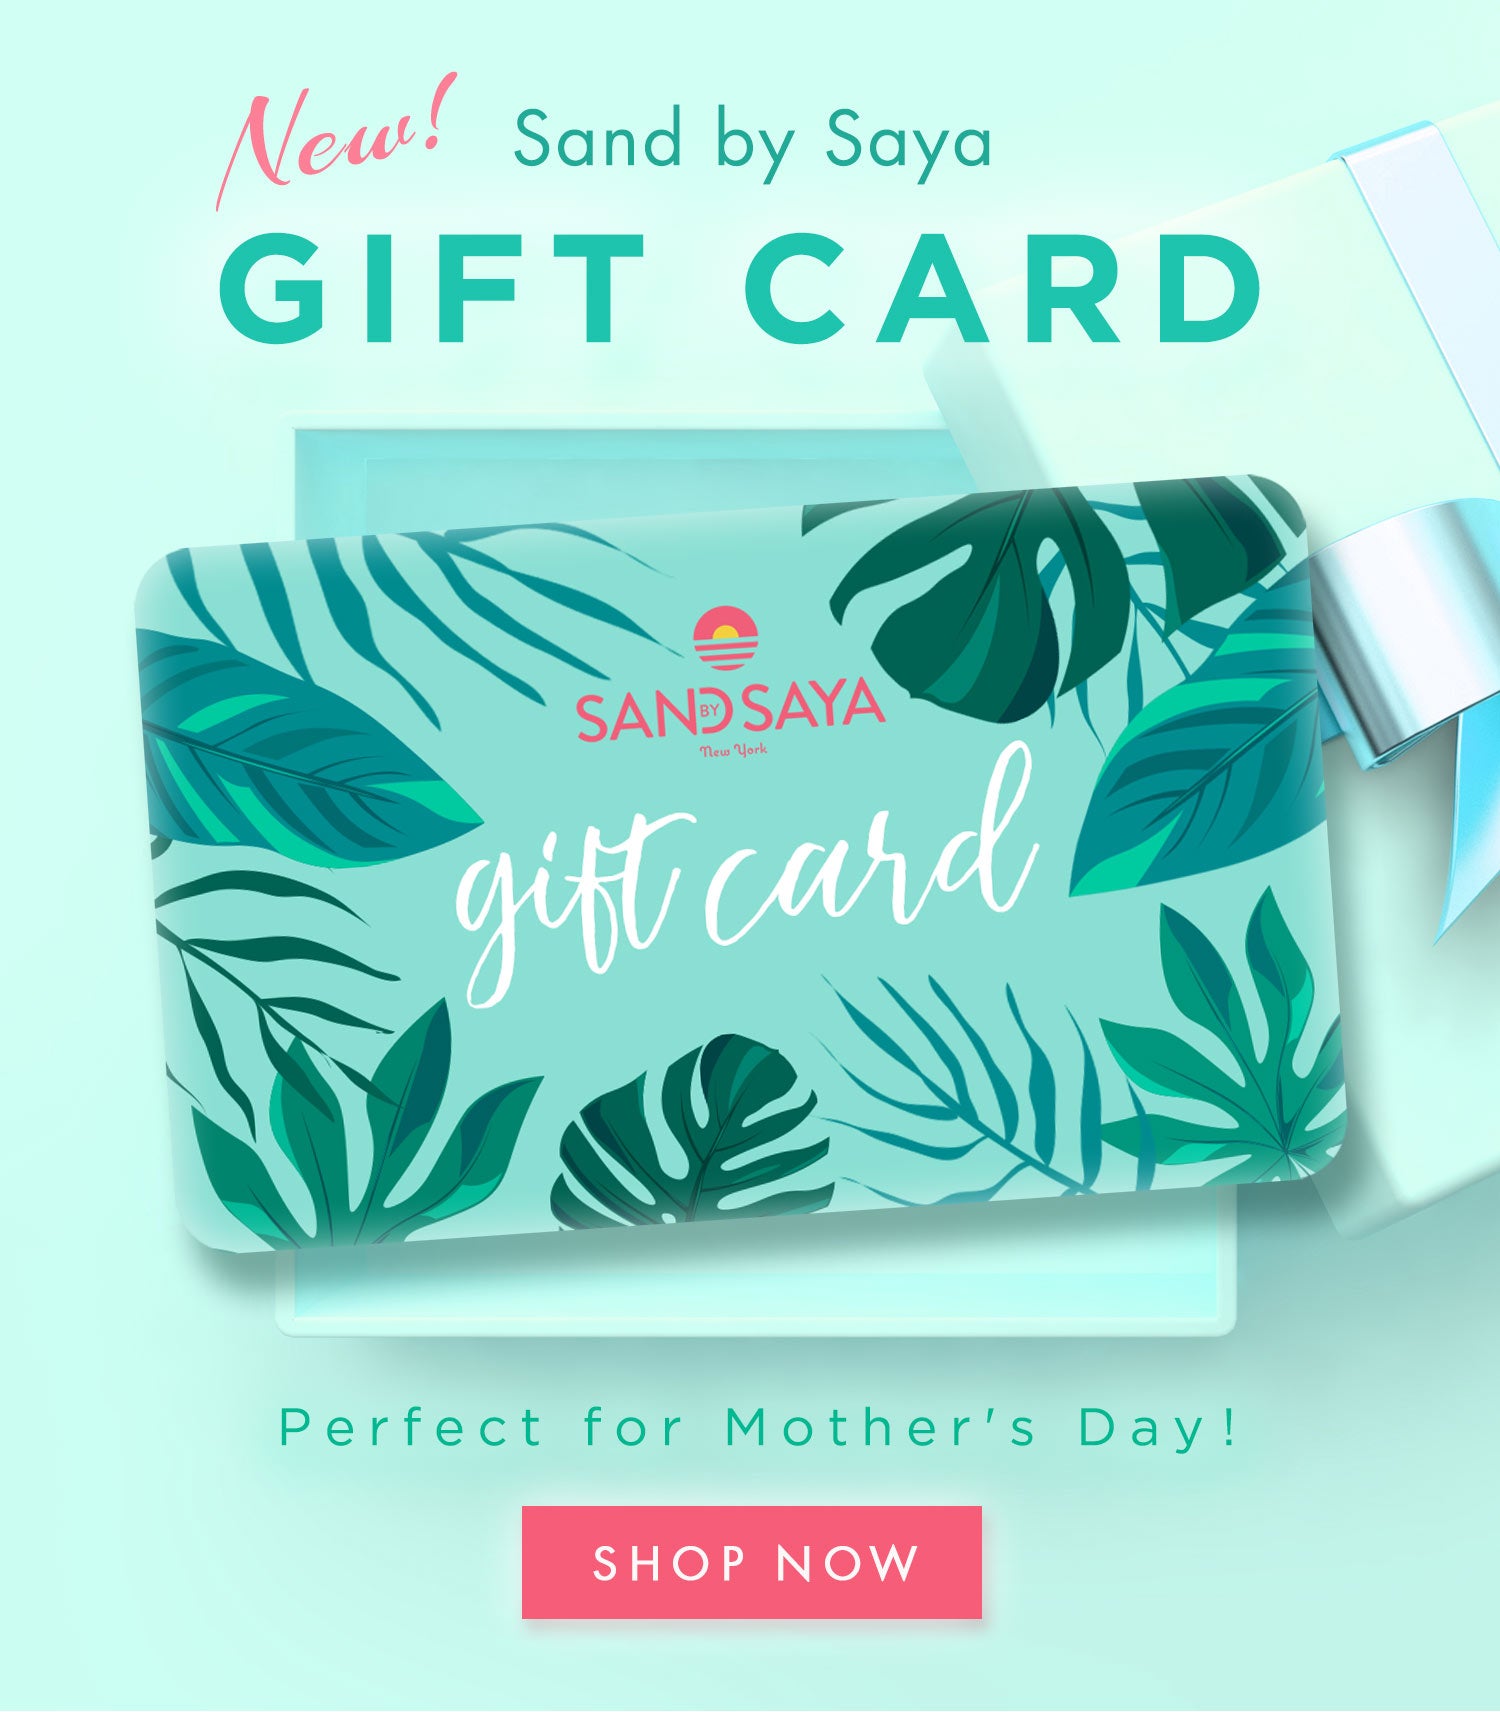 Gift card is finally available! Get small discount by buying this!